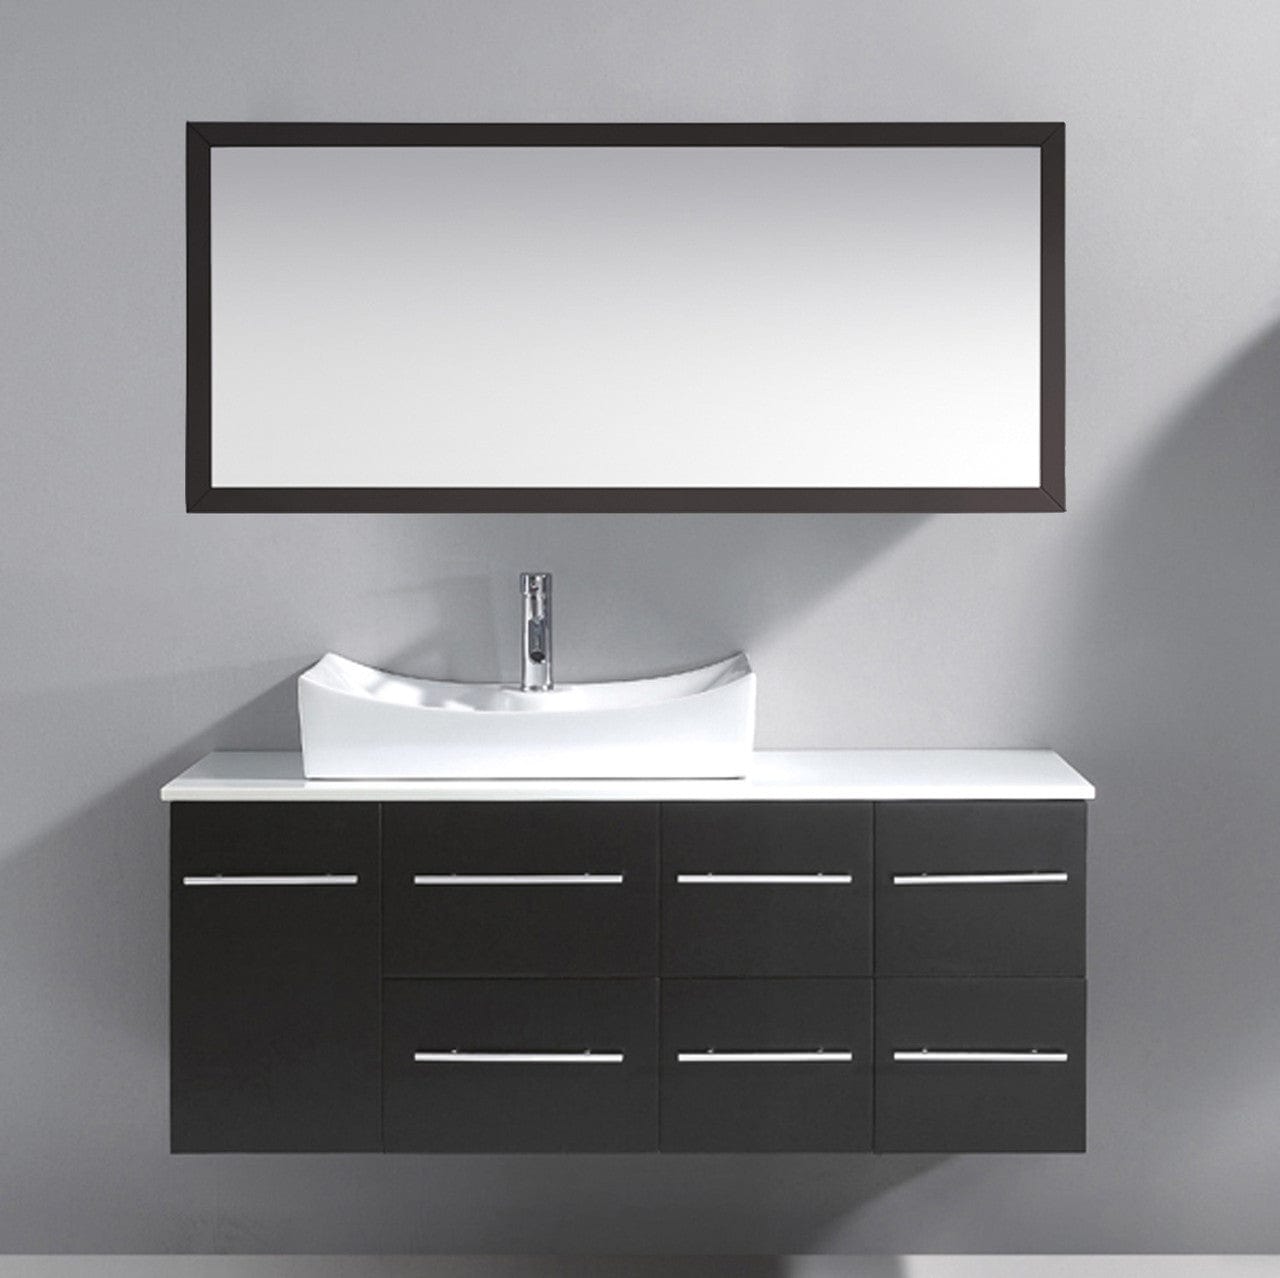 Virtu USA Ceanna 55 Single Bathroom Vanity Set in Espresso w/ White Artificial Stone Counter-Top front view